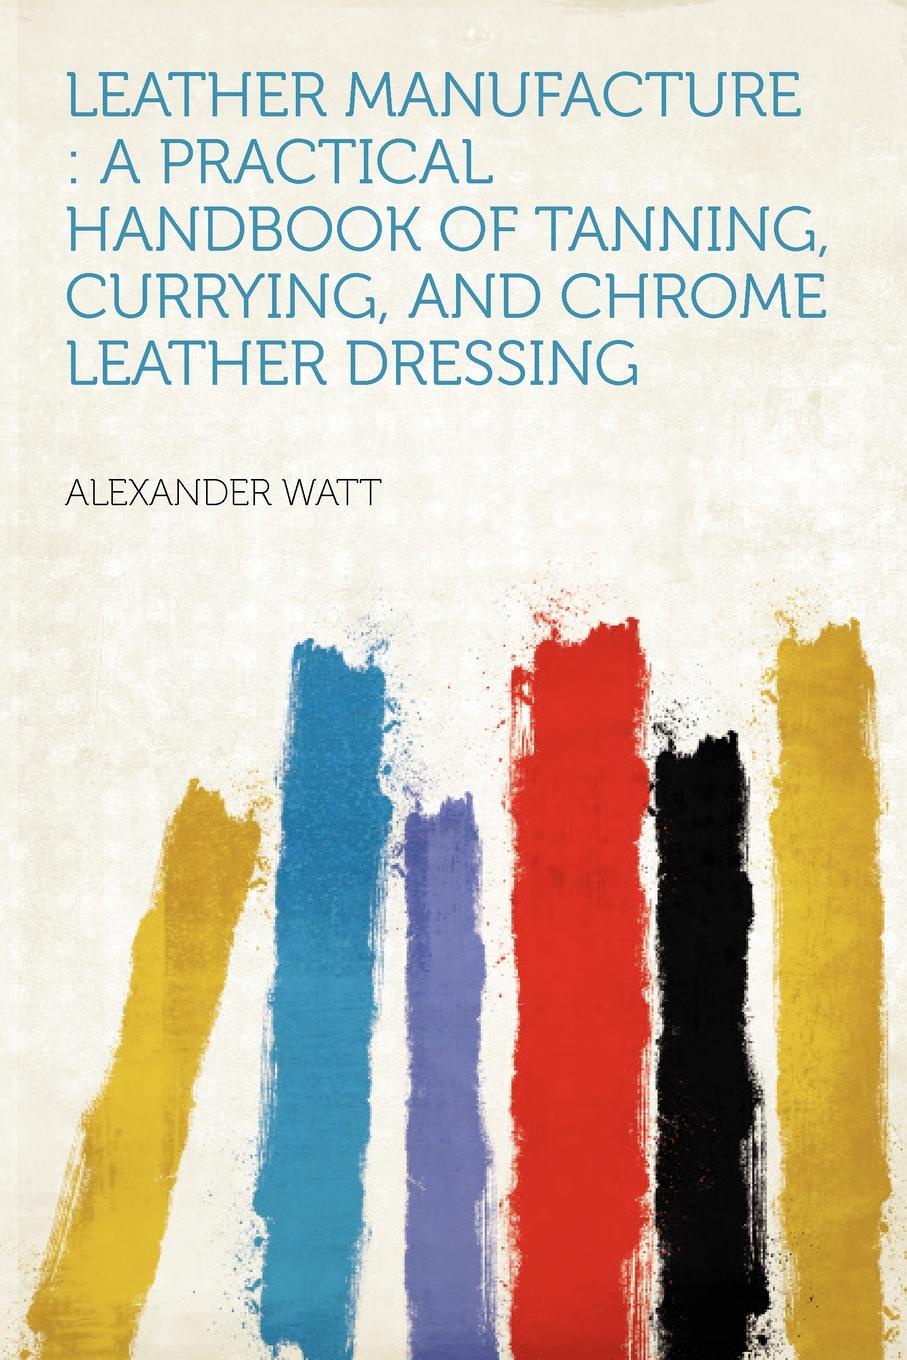 Leather Manufacture. a Practical Handbook of Tanning, Currying, and Chrome Leather Dressing